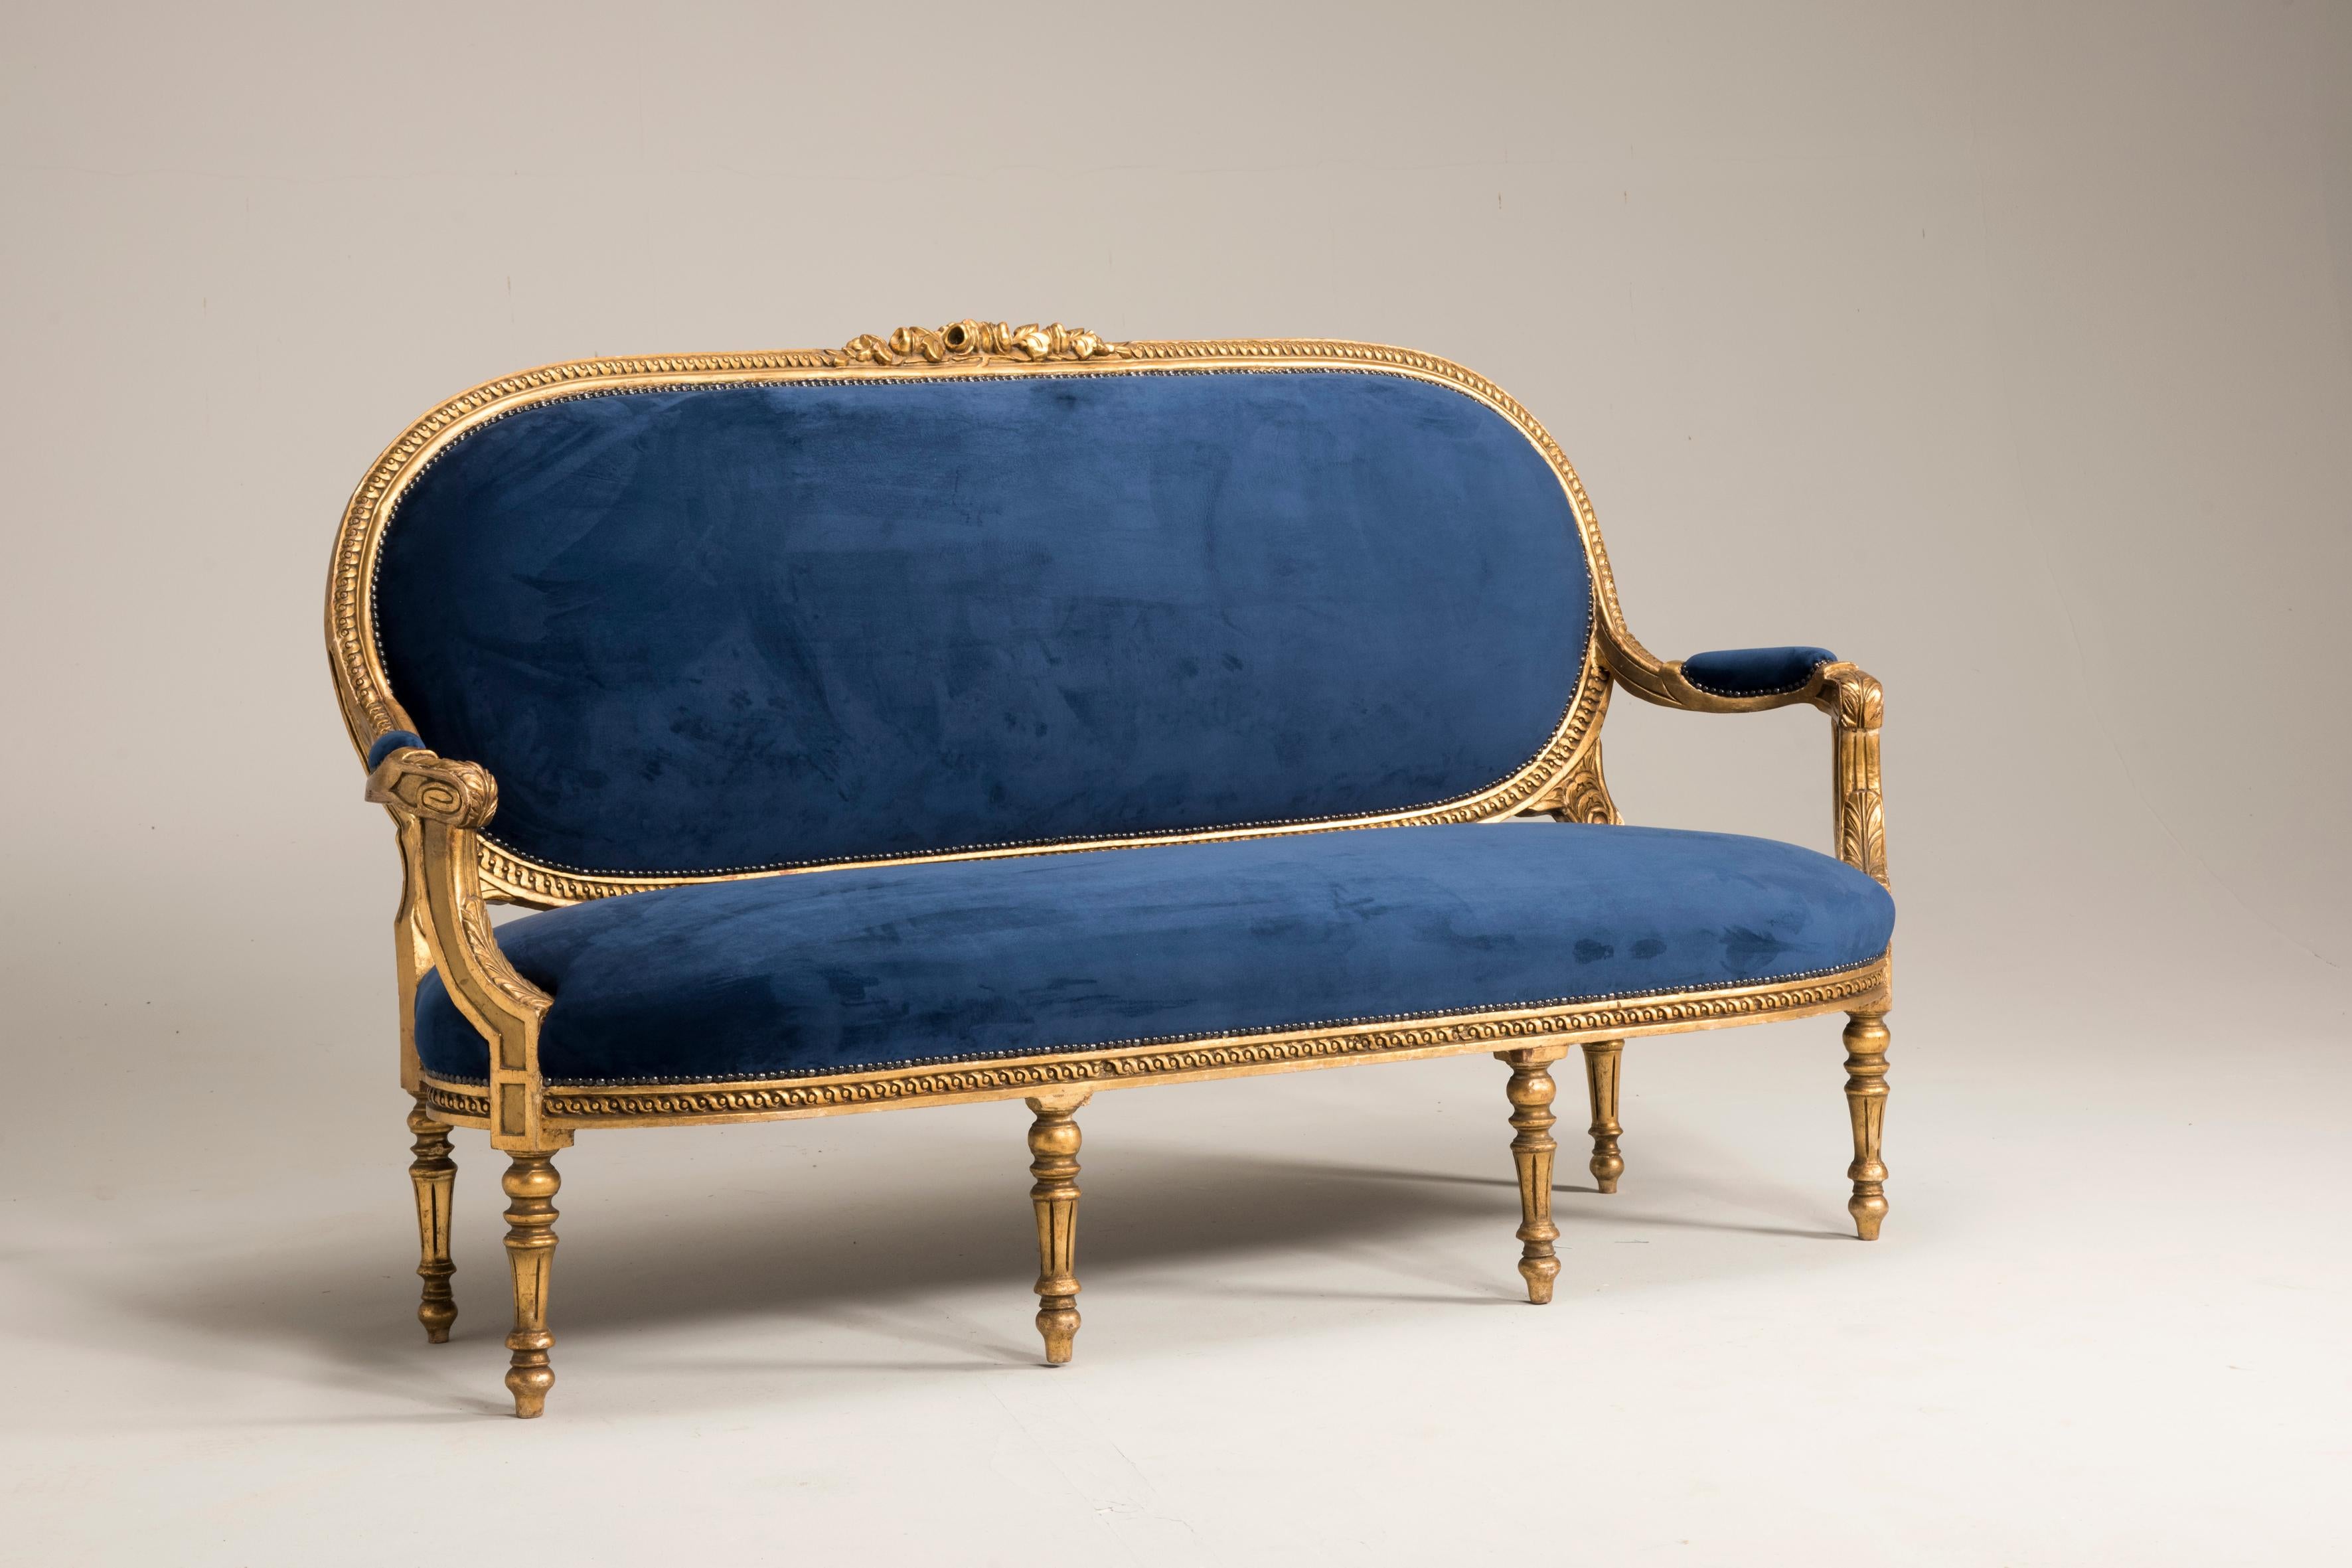 Louis XVI style giltwood goldfoil blue velvet sofa from Italy, from 1950. Conservative Restoration of wooden parts, re upholstered with blue velvet. 
Size: 
W 72.8346 inches / 185 cm
D 23.622 inches / 60 cm
H 41.7323 inches / 106 cm.

Feel free to